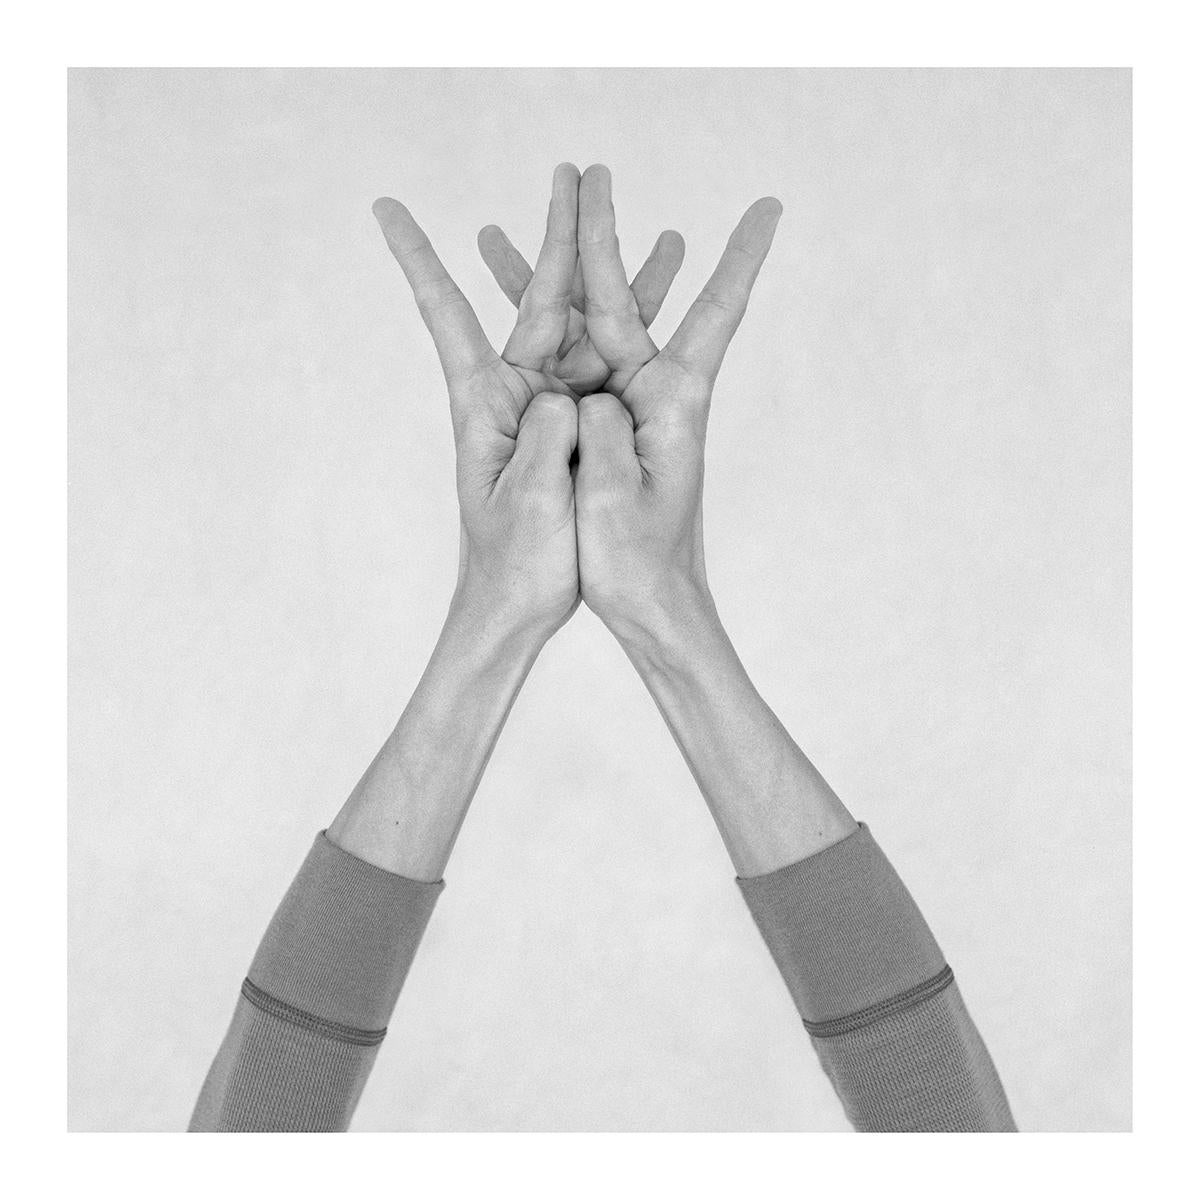 Untitled XII, XXXVII, and Untitled XXVI. Hands. From the Series Chiromorphose - Aesthetic Movement Photograph by Nico Baixas / Gos-com-fuig